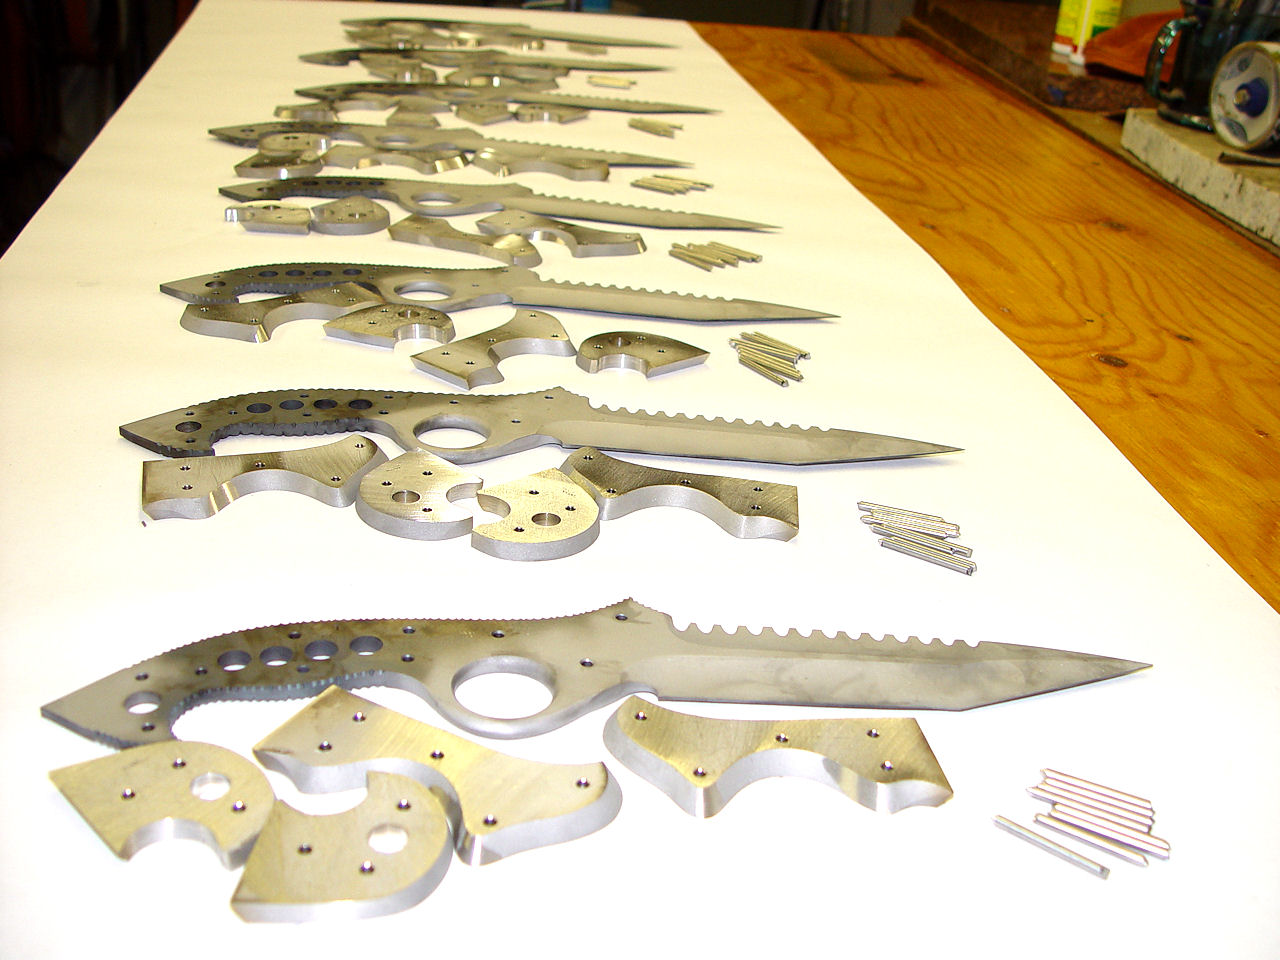 Group of Counterterrorism knives handmade by Jay Fisher in his studio in Clovis, New Mexico, USA